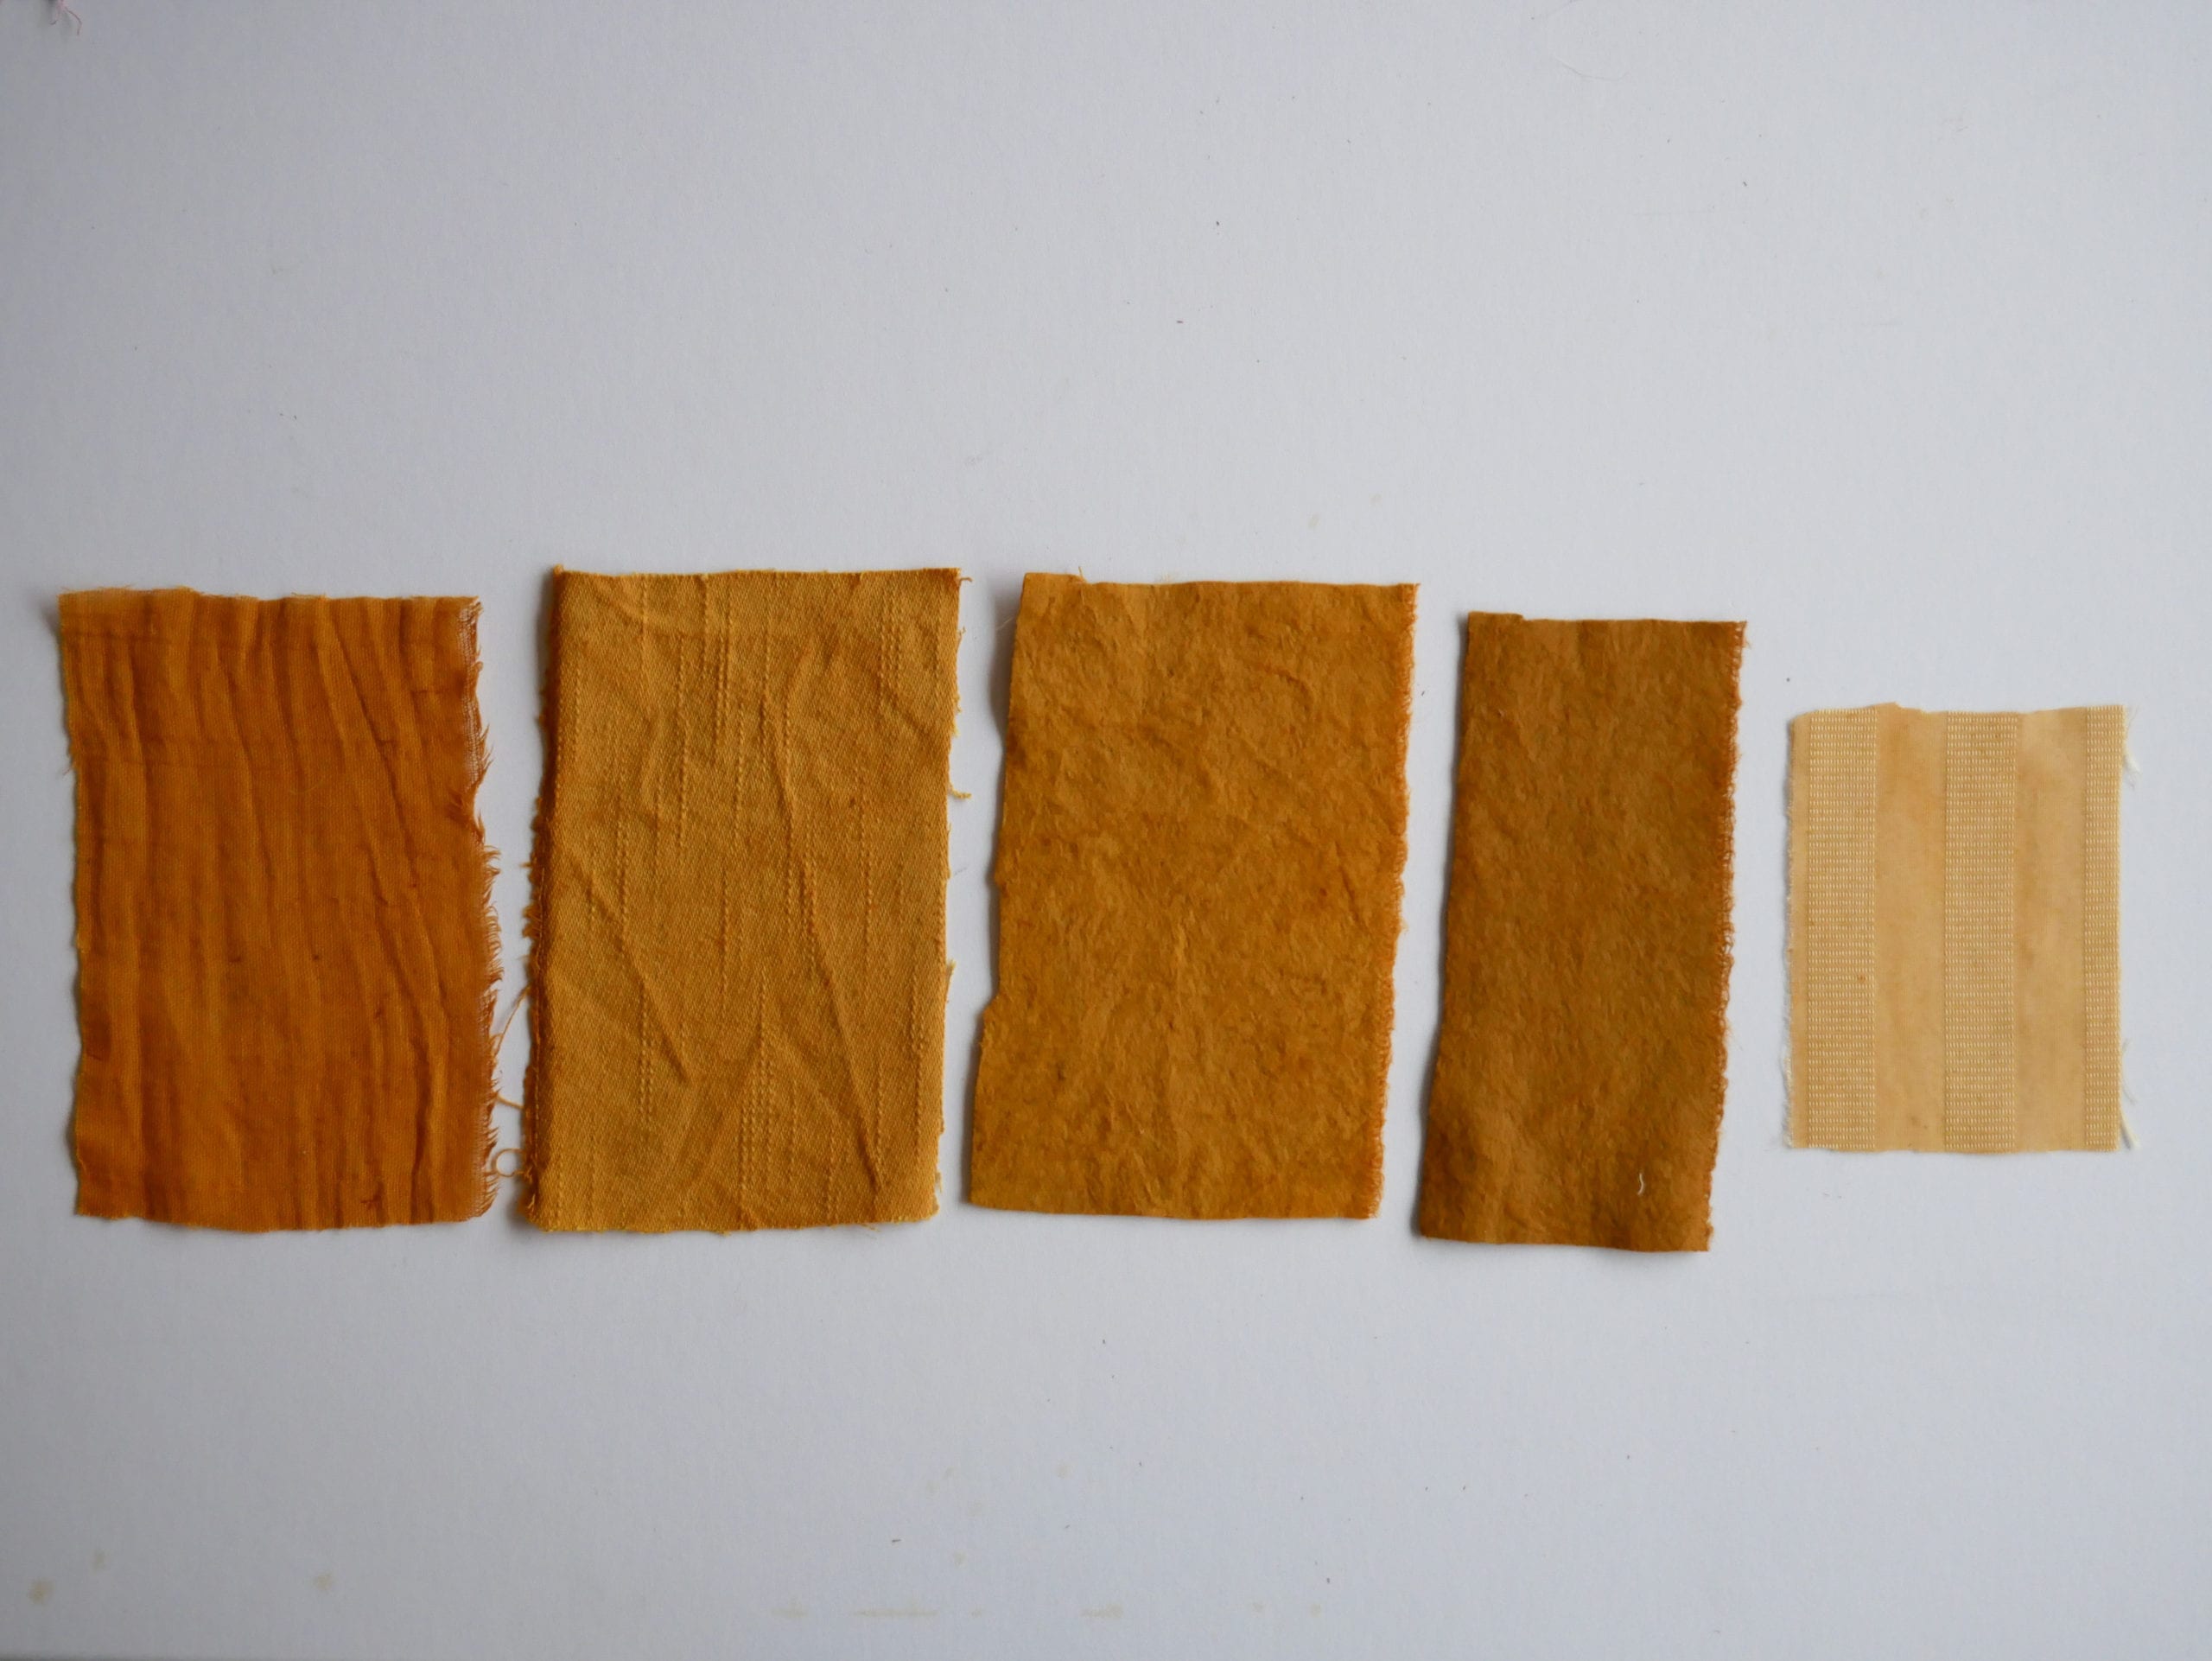 Onion skin natural dye samples on different substrates